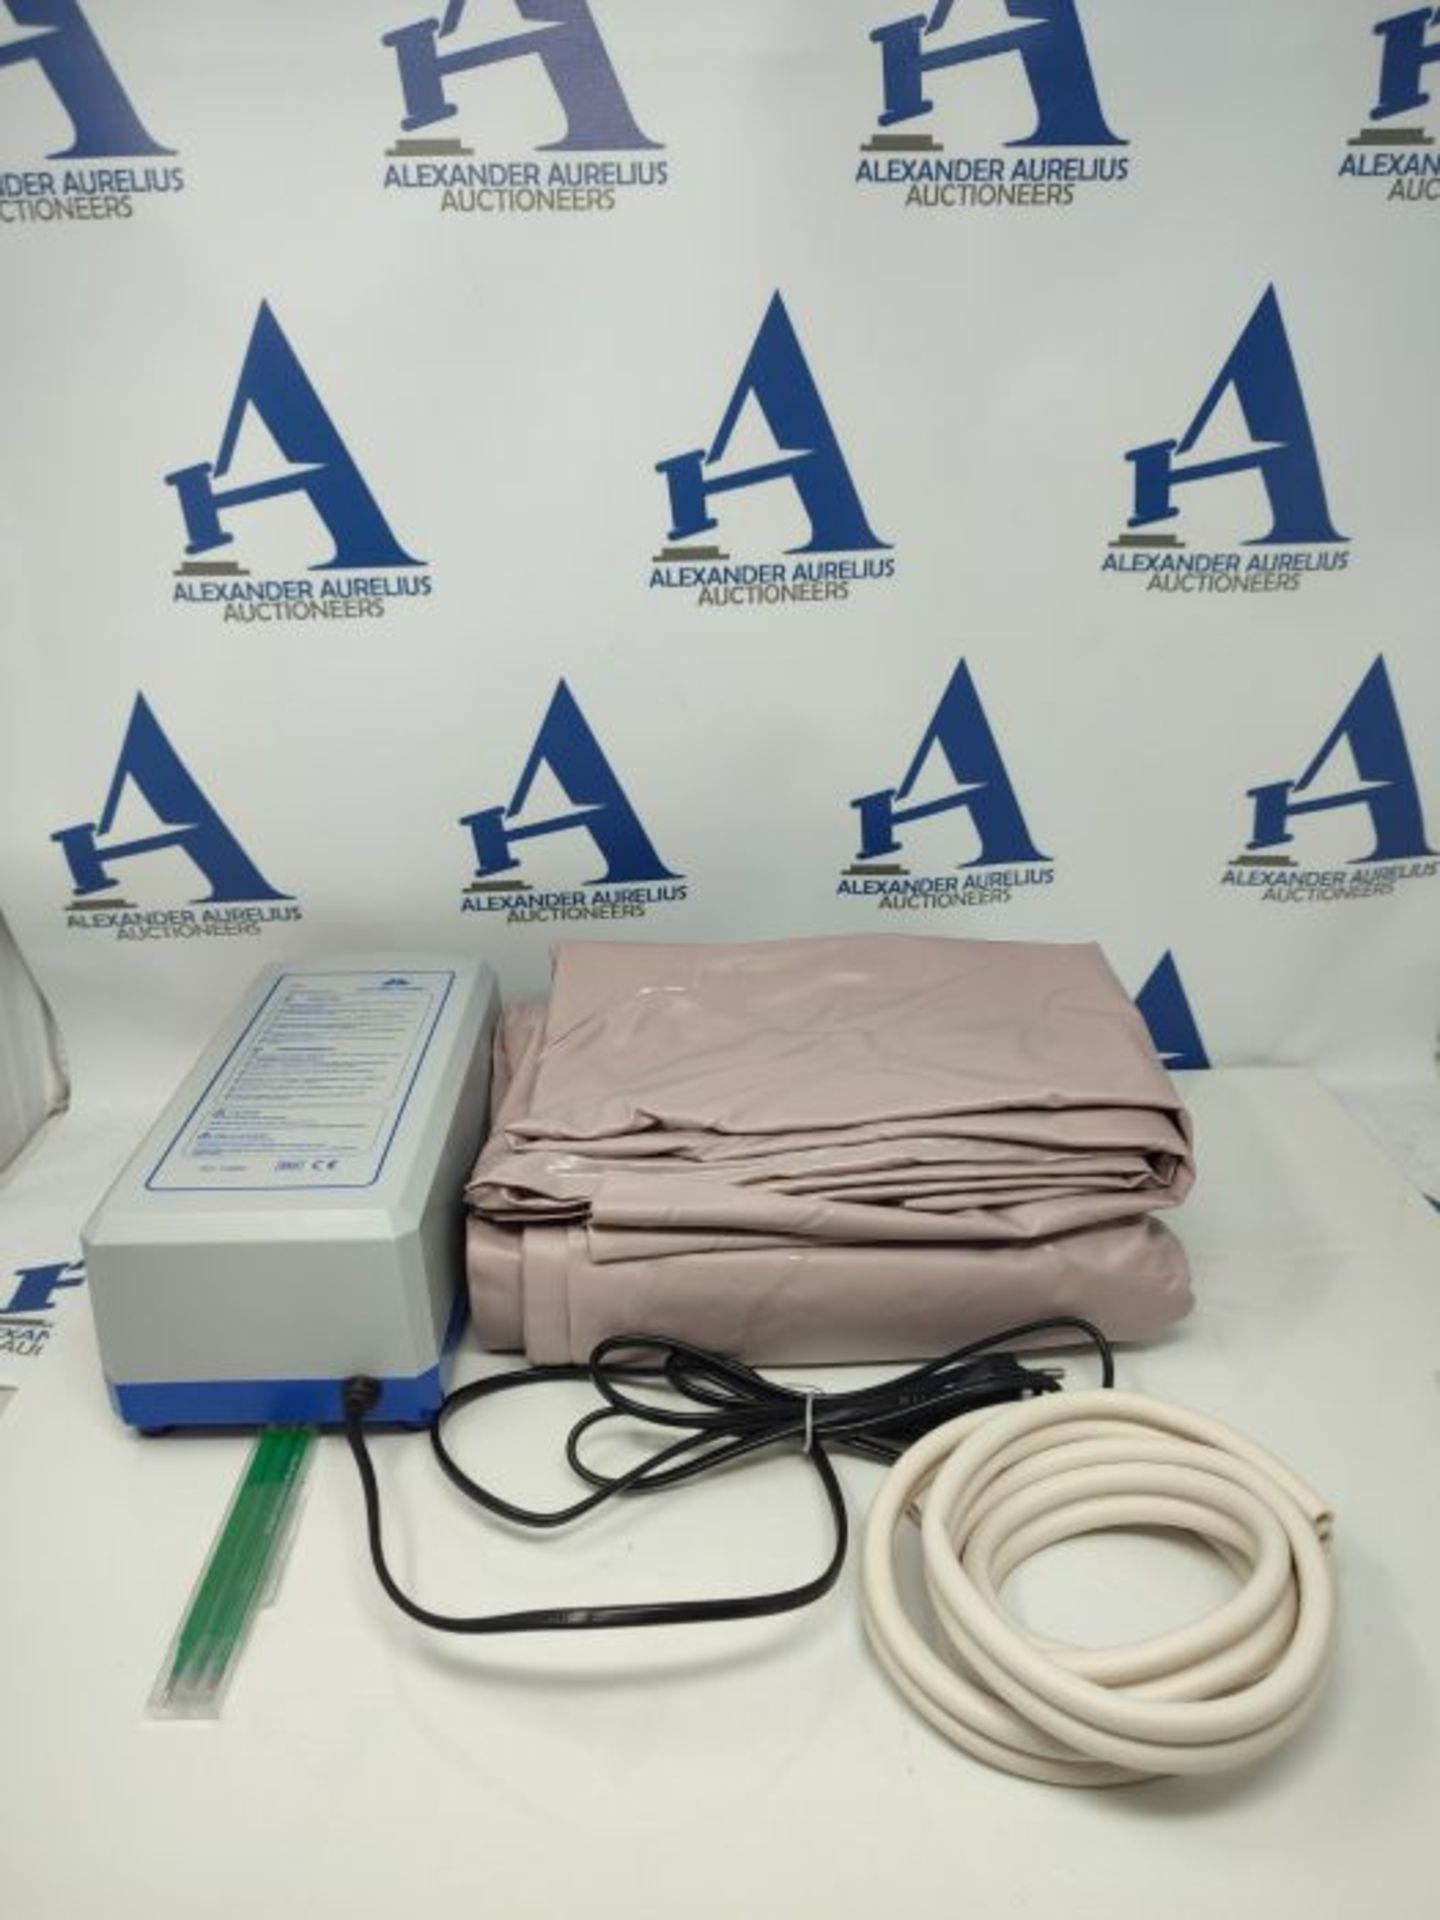 Mobiclinic Anti-Decubitus Air Pressure Mattress, Anti-Bedsores, Cell Alternation and C - Image 2 of 2